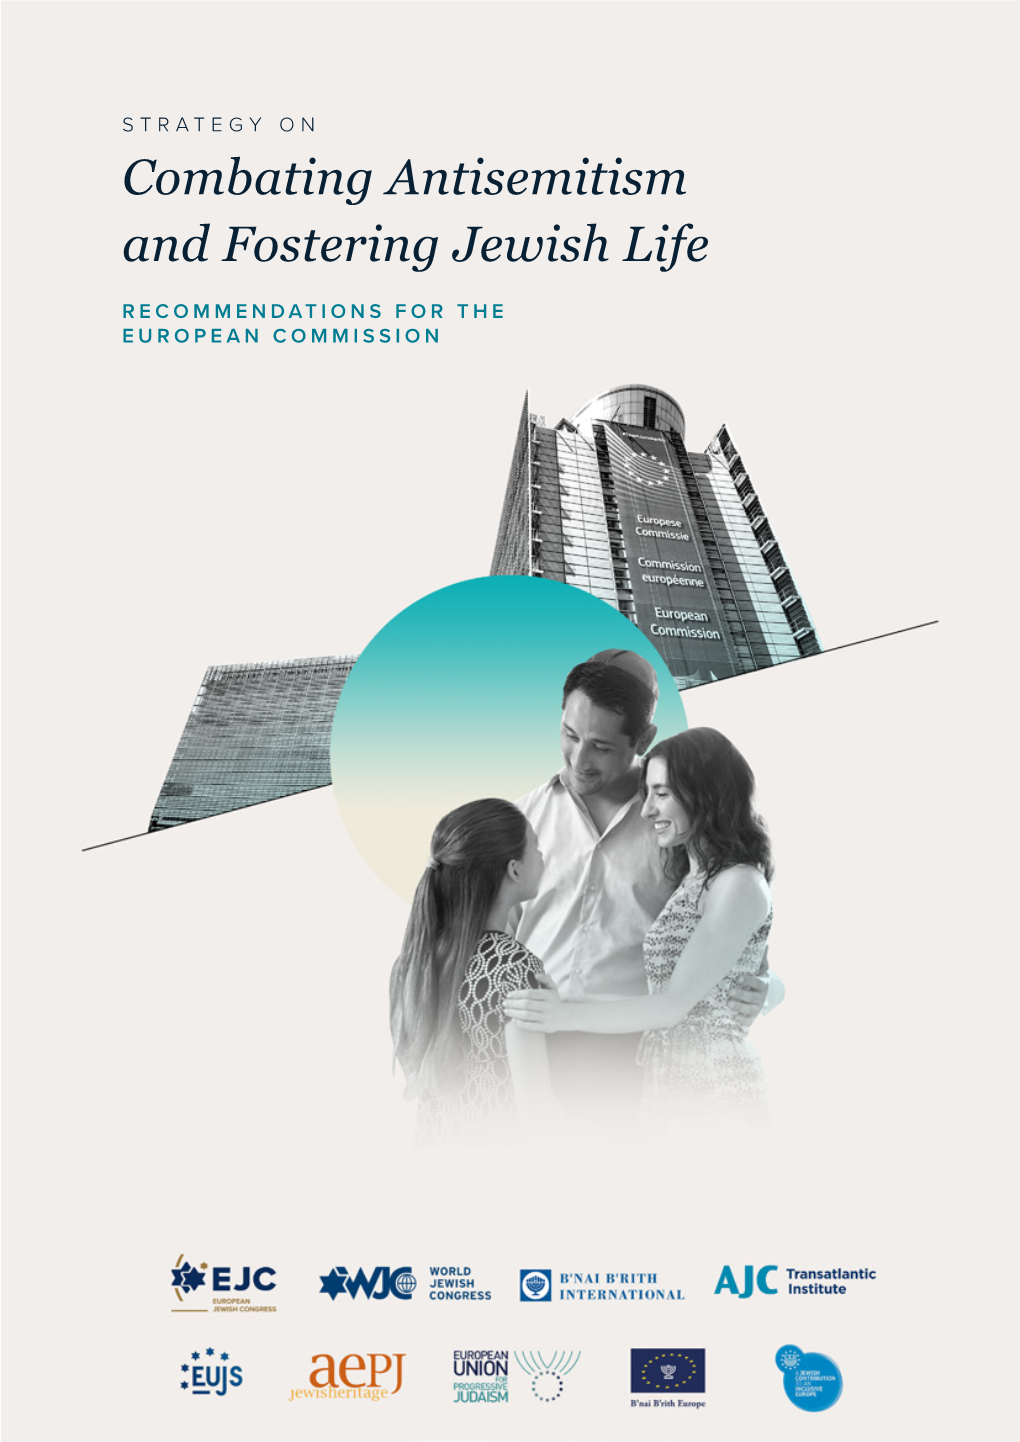 Combating Antisemitism and Fostering Jewish Life